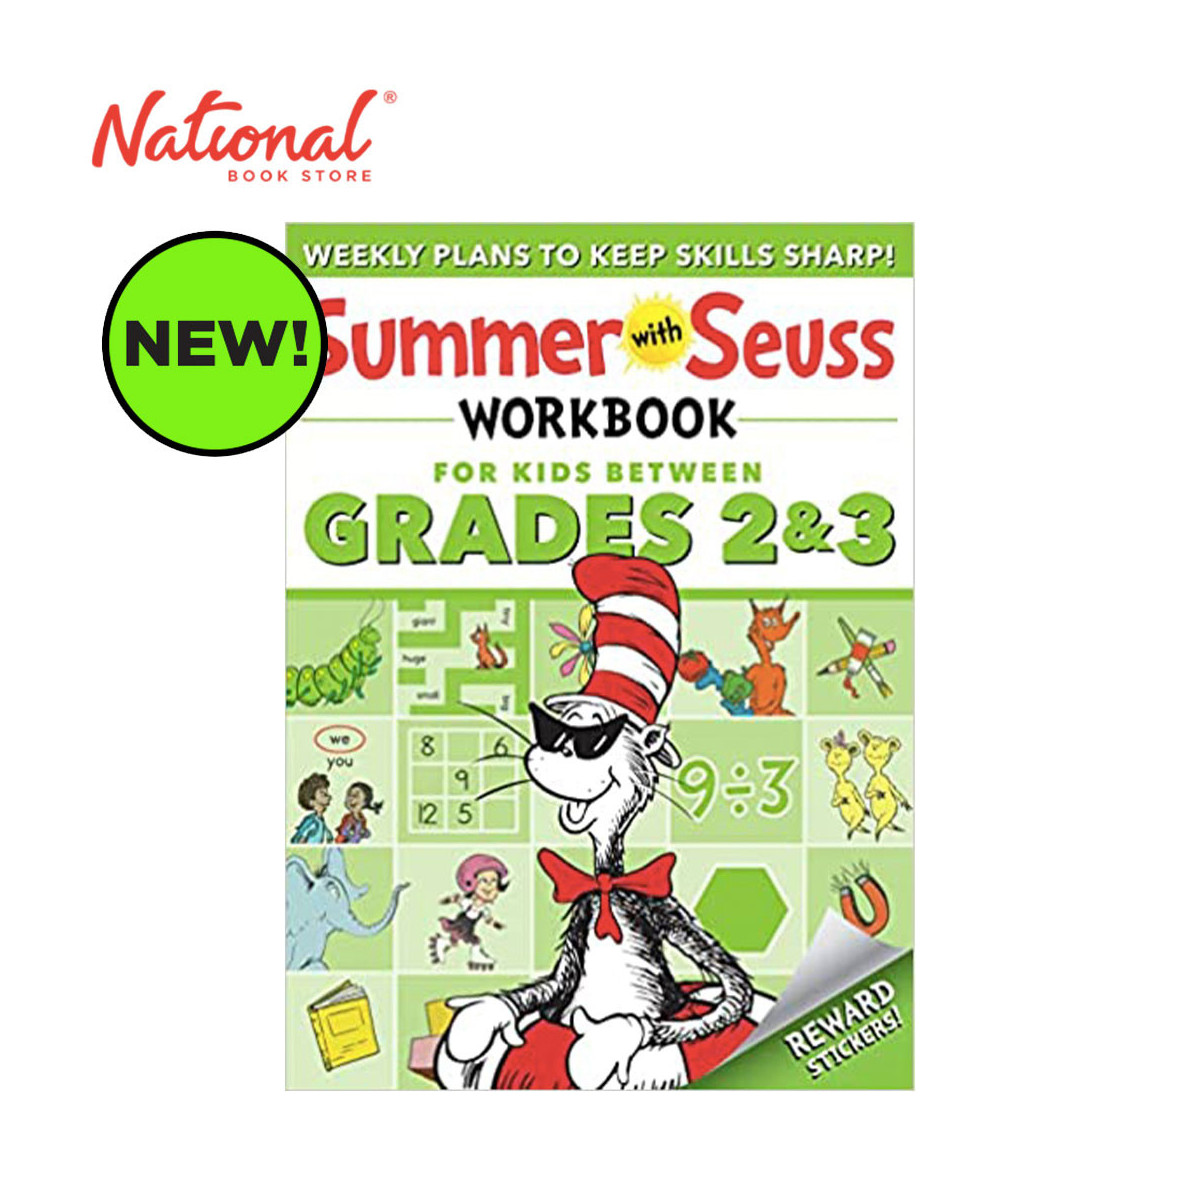 Summer with Seuss Workbook Grades 2-3 by Dr Seuss - Trade Paperback - Books for Kids